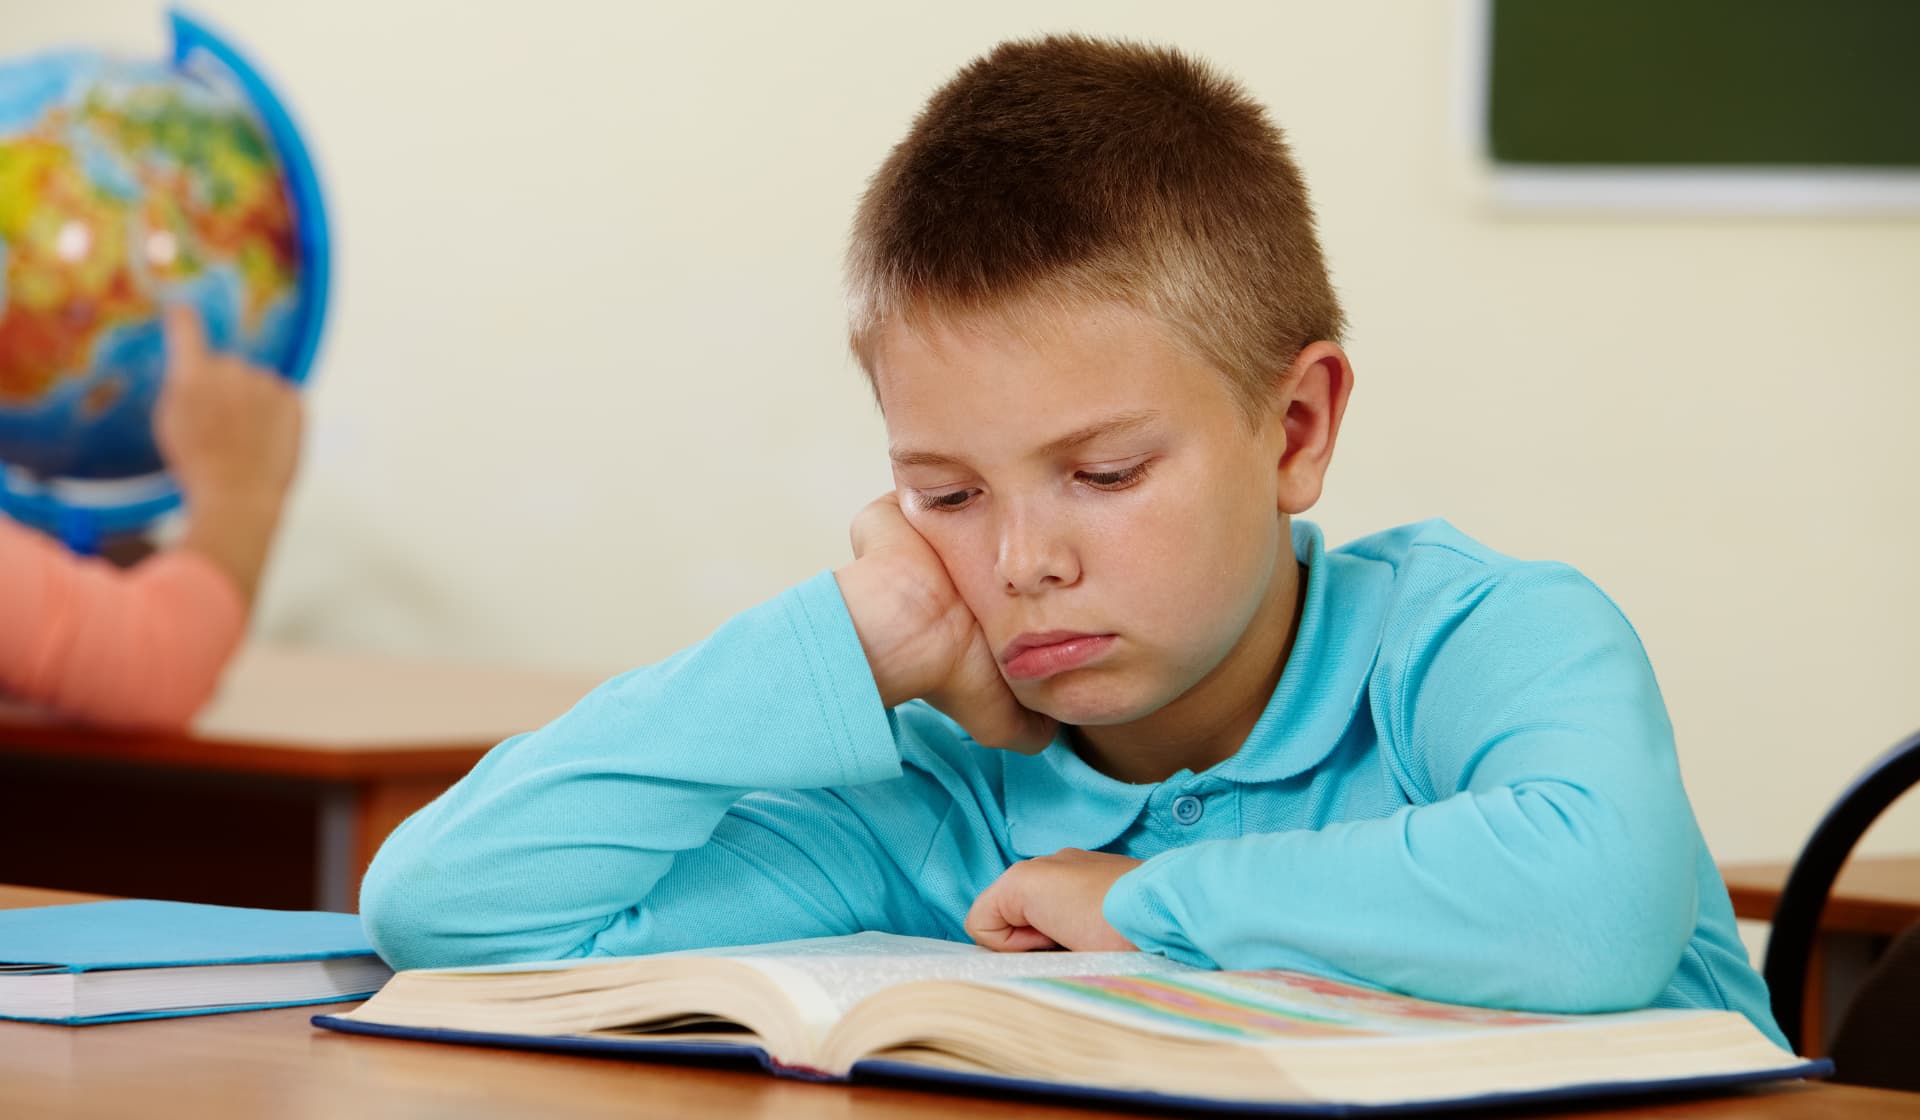 Study: Can Dyslexia Be Detected Before a Child Learns to Read?